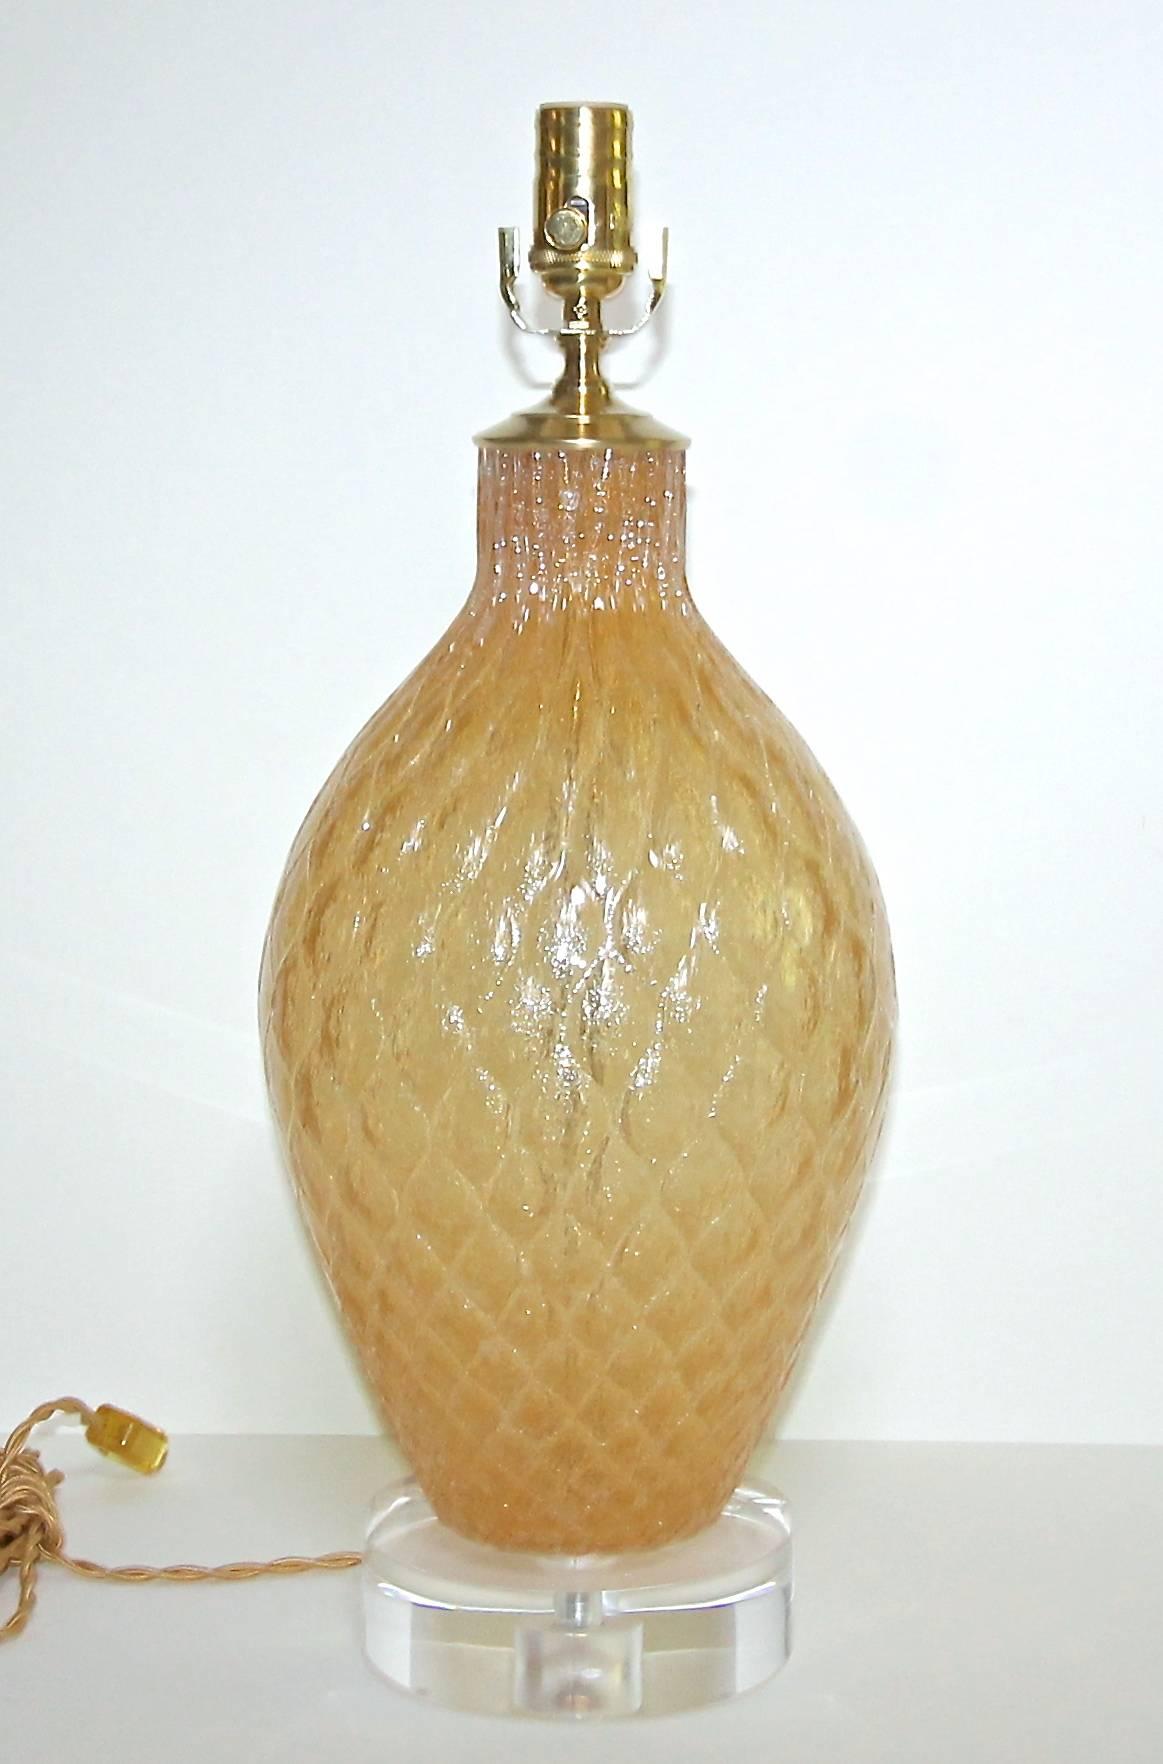 Italian Murano handblown amber color glass table lamp by Galliano Ferro. Glass has a textured diamond pattern on the exterior and is created with the pulegoso technique, filled with tiny bubbles. Mounted on new custom acrylic base, newly wired for